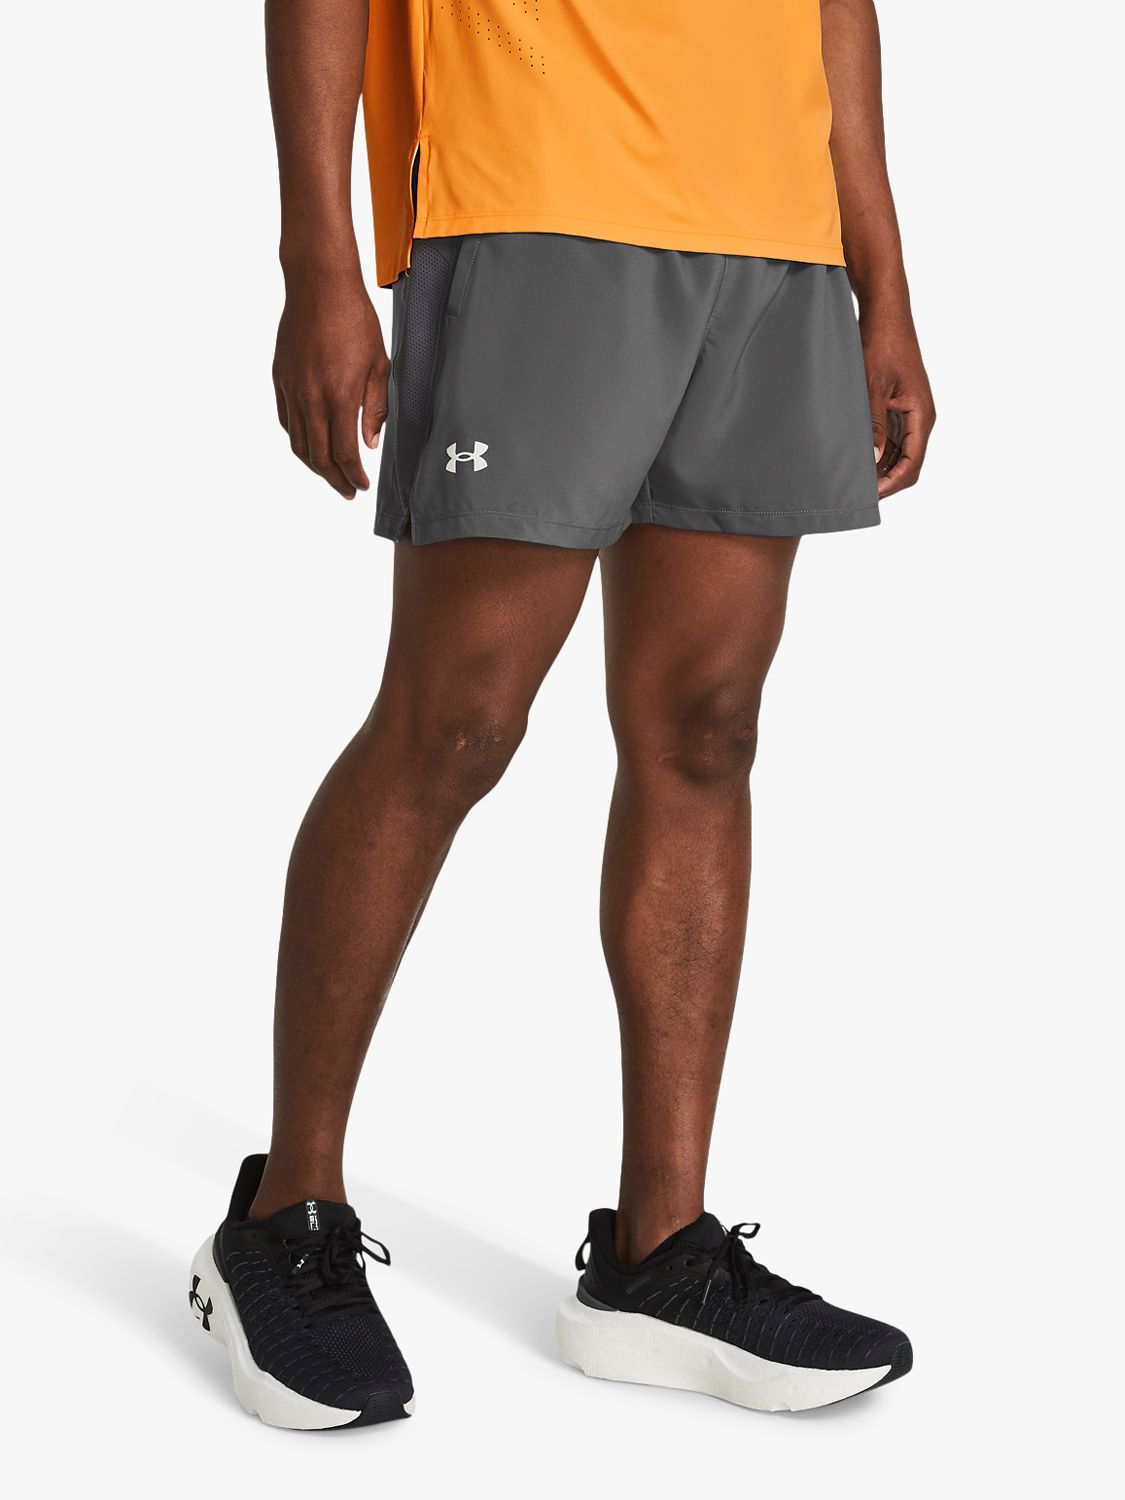 Under Armour Launch Running Shorts, Rock/Reflective, S